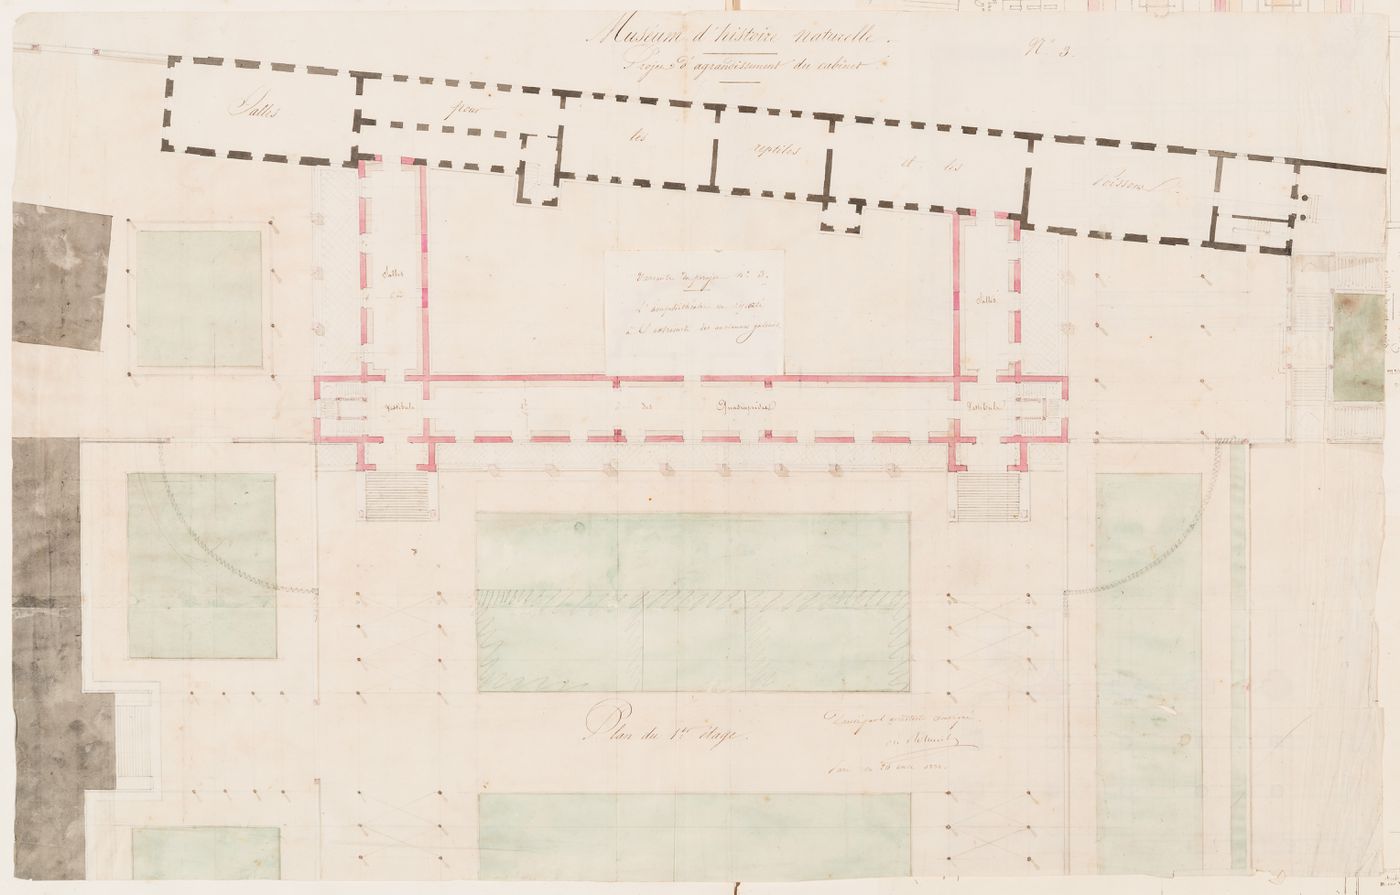 Project for a Galerie de zoologie with a single row of galleries and a central courtyard, 1838: First floor plan